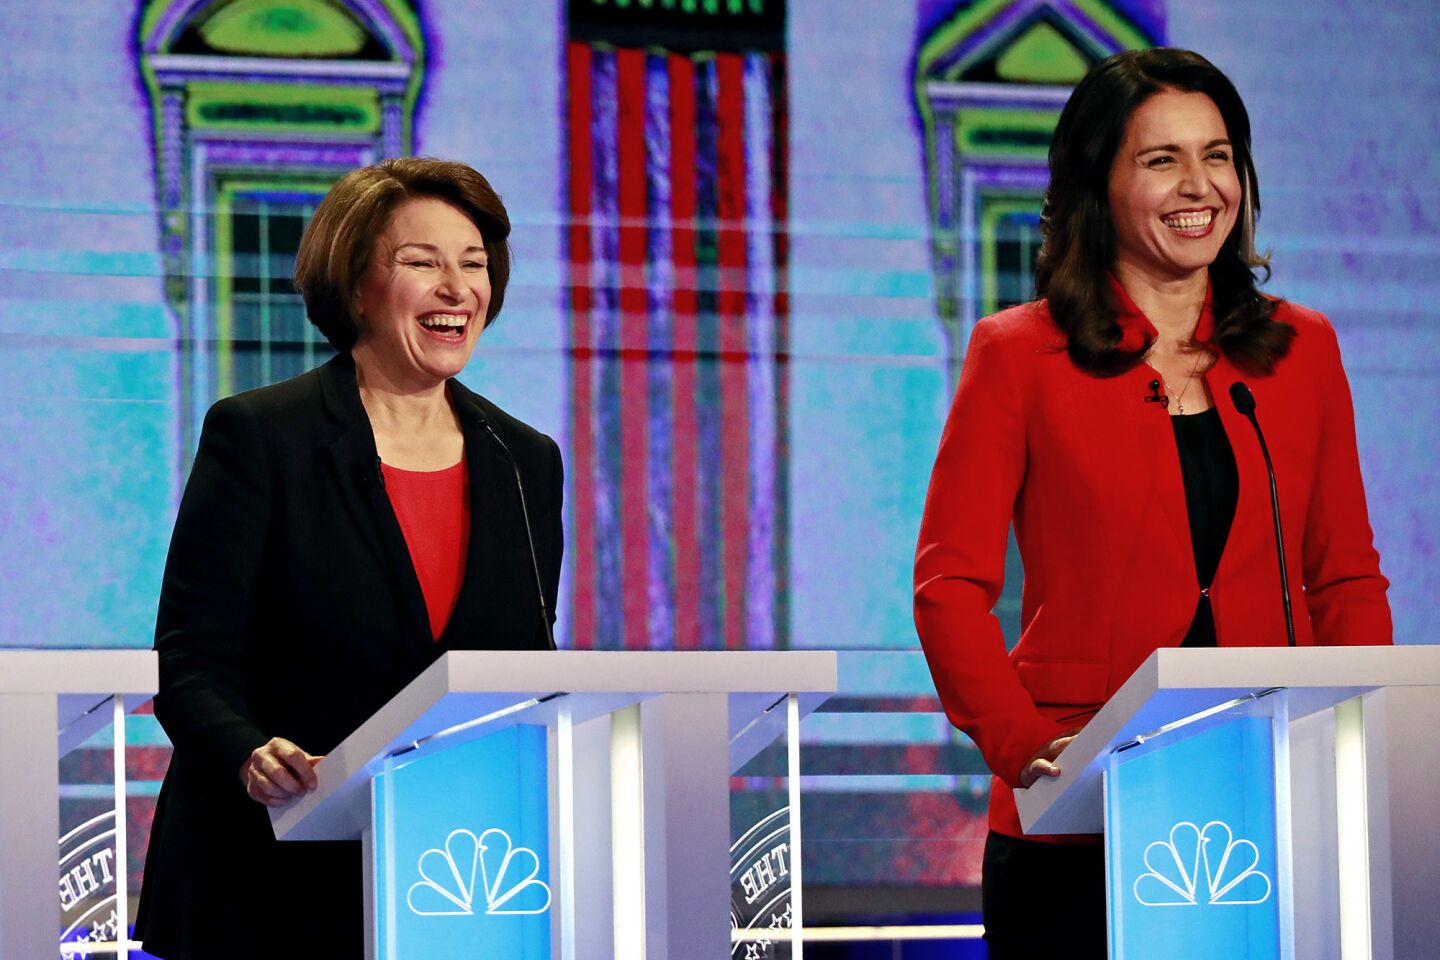 Democratic presidential candidates Sen. Amy Klobuchar, D-Minn., and Rep. Tulsi Gabbard, D-Hawaii, smile during a Democratic primary debate hosted by NBC News at the Adrienne Arsht Center for the Performing Arts, Wednesday, June 26, 2019, in Miami.